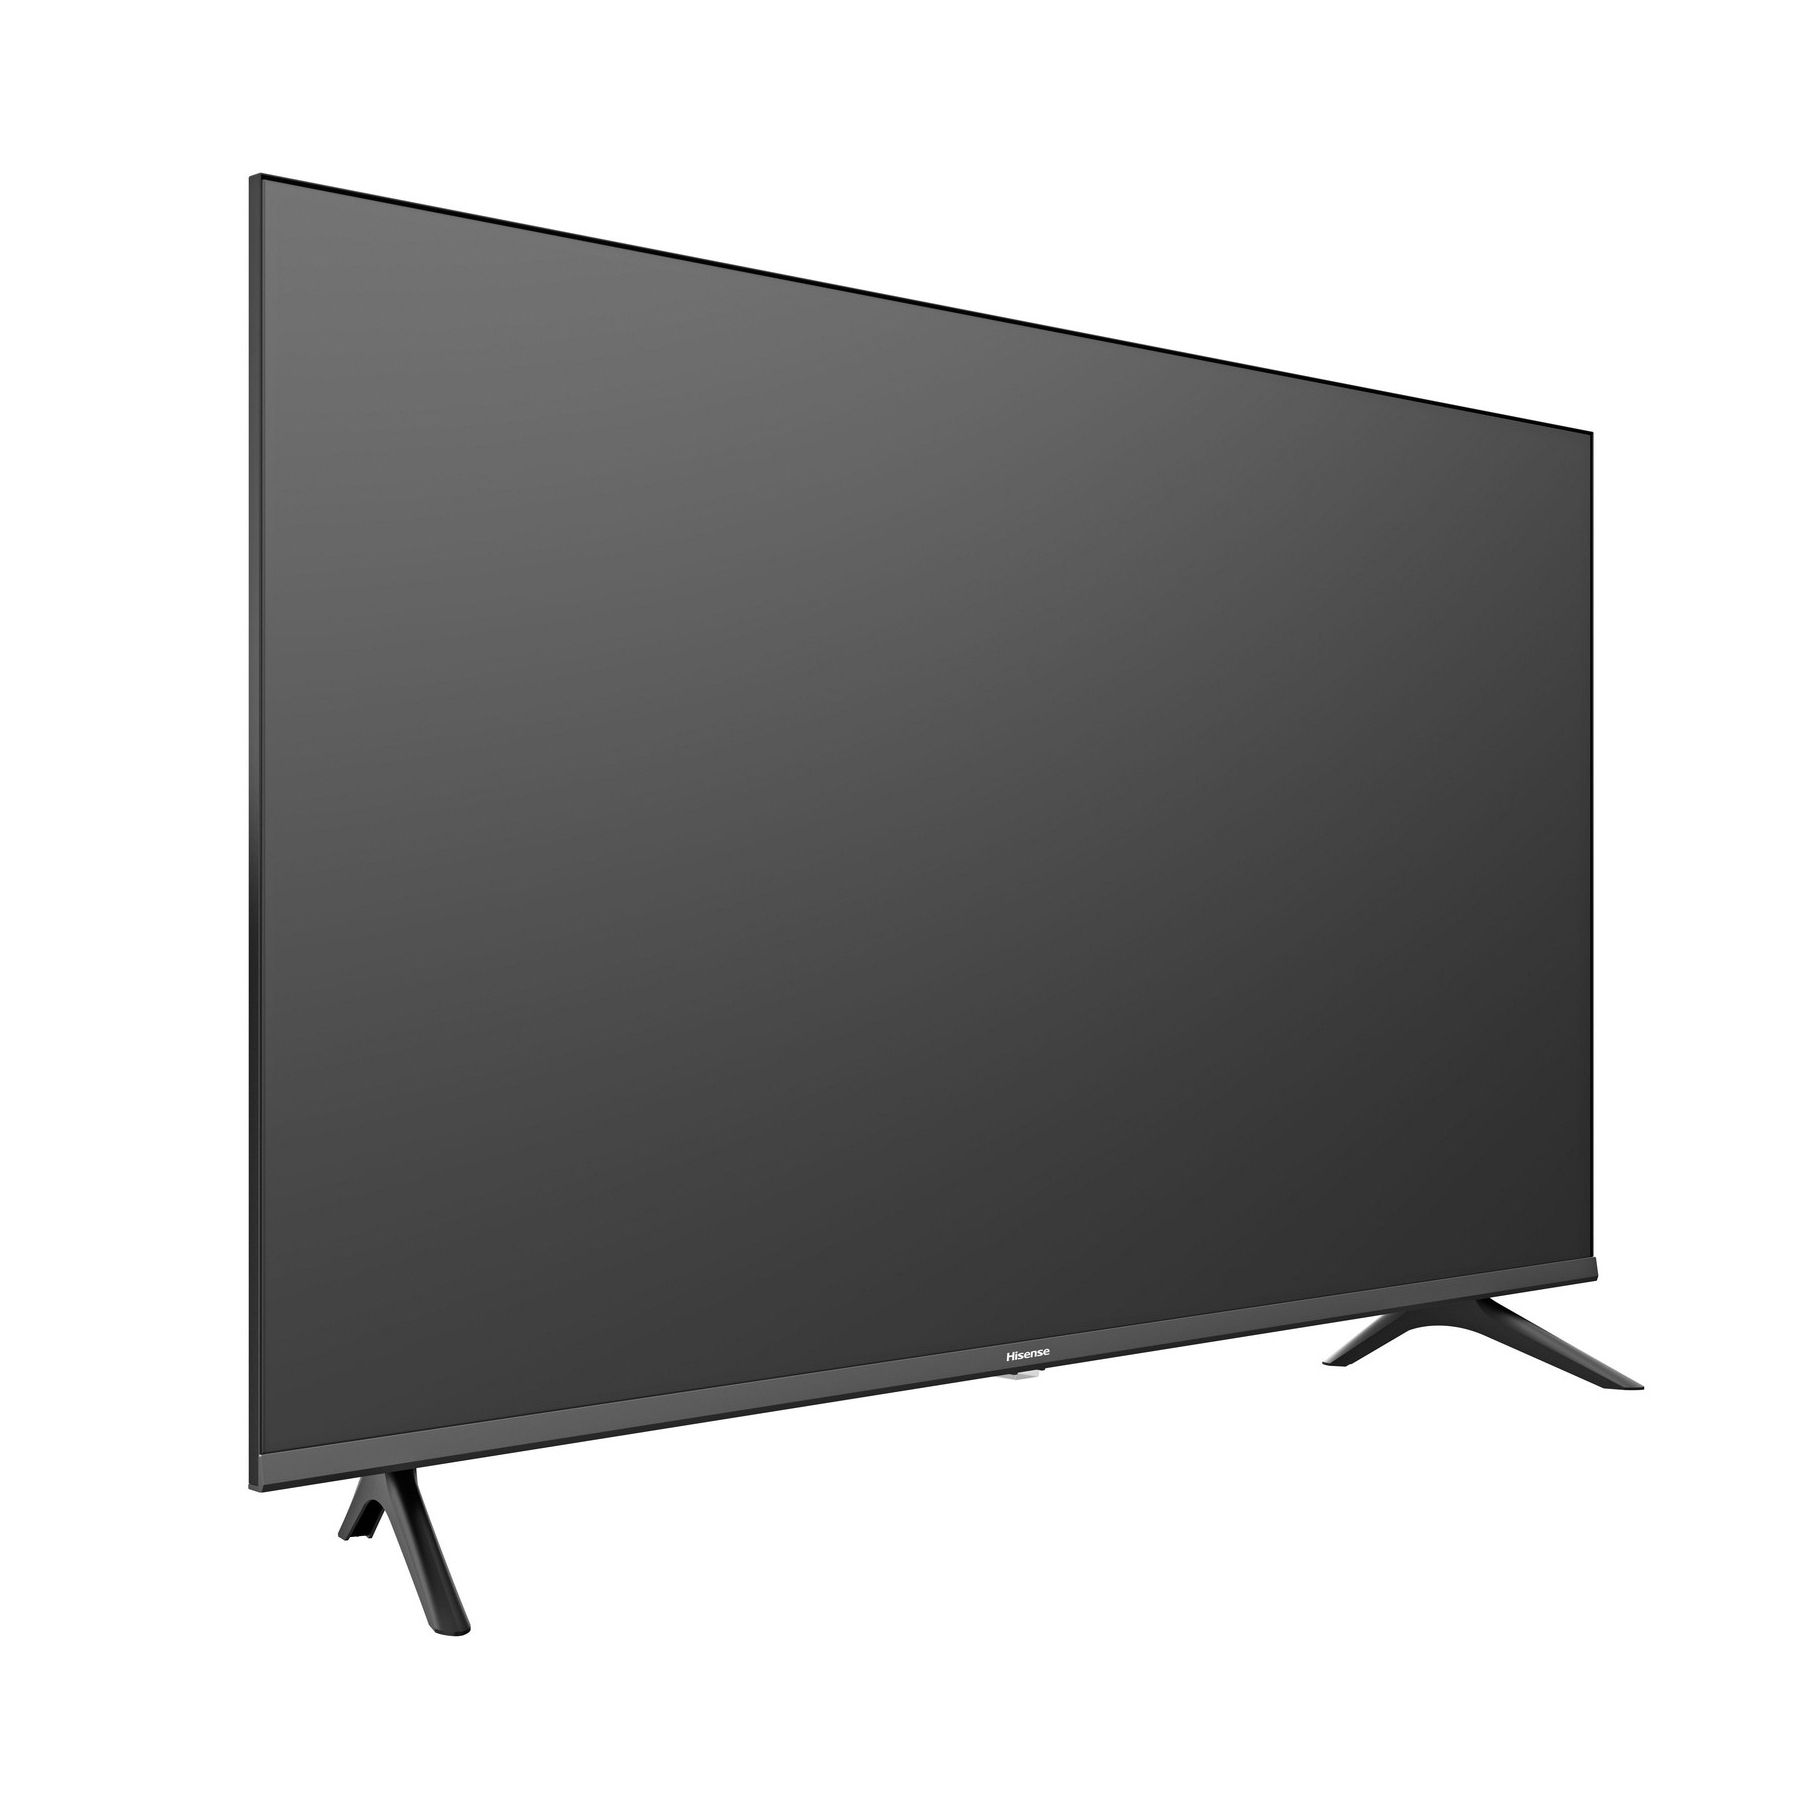 43 inch TVs with 43.0 - 54.0 inch screens